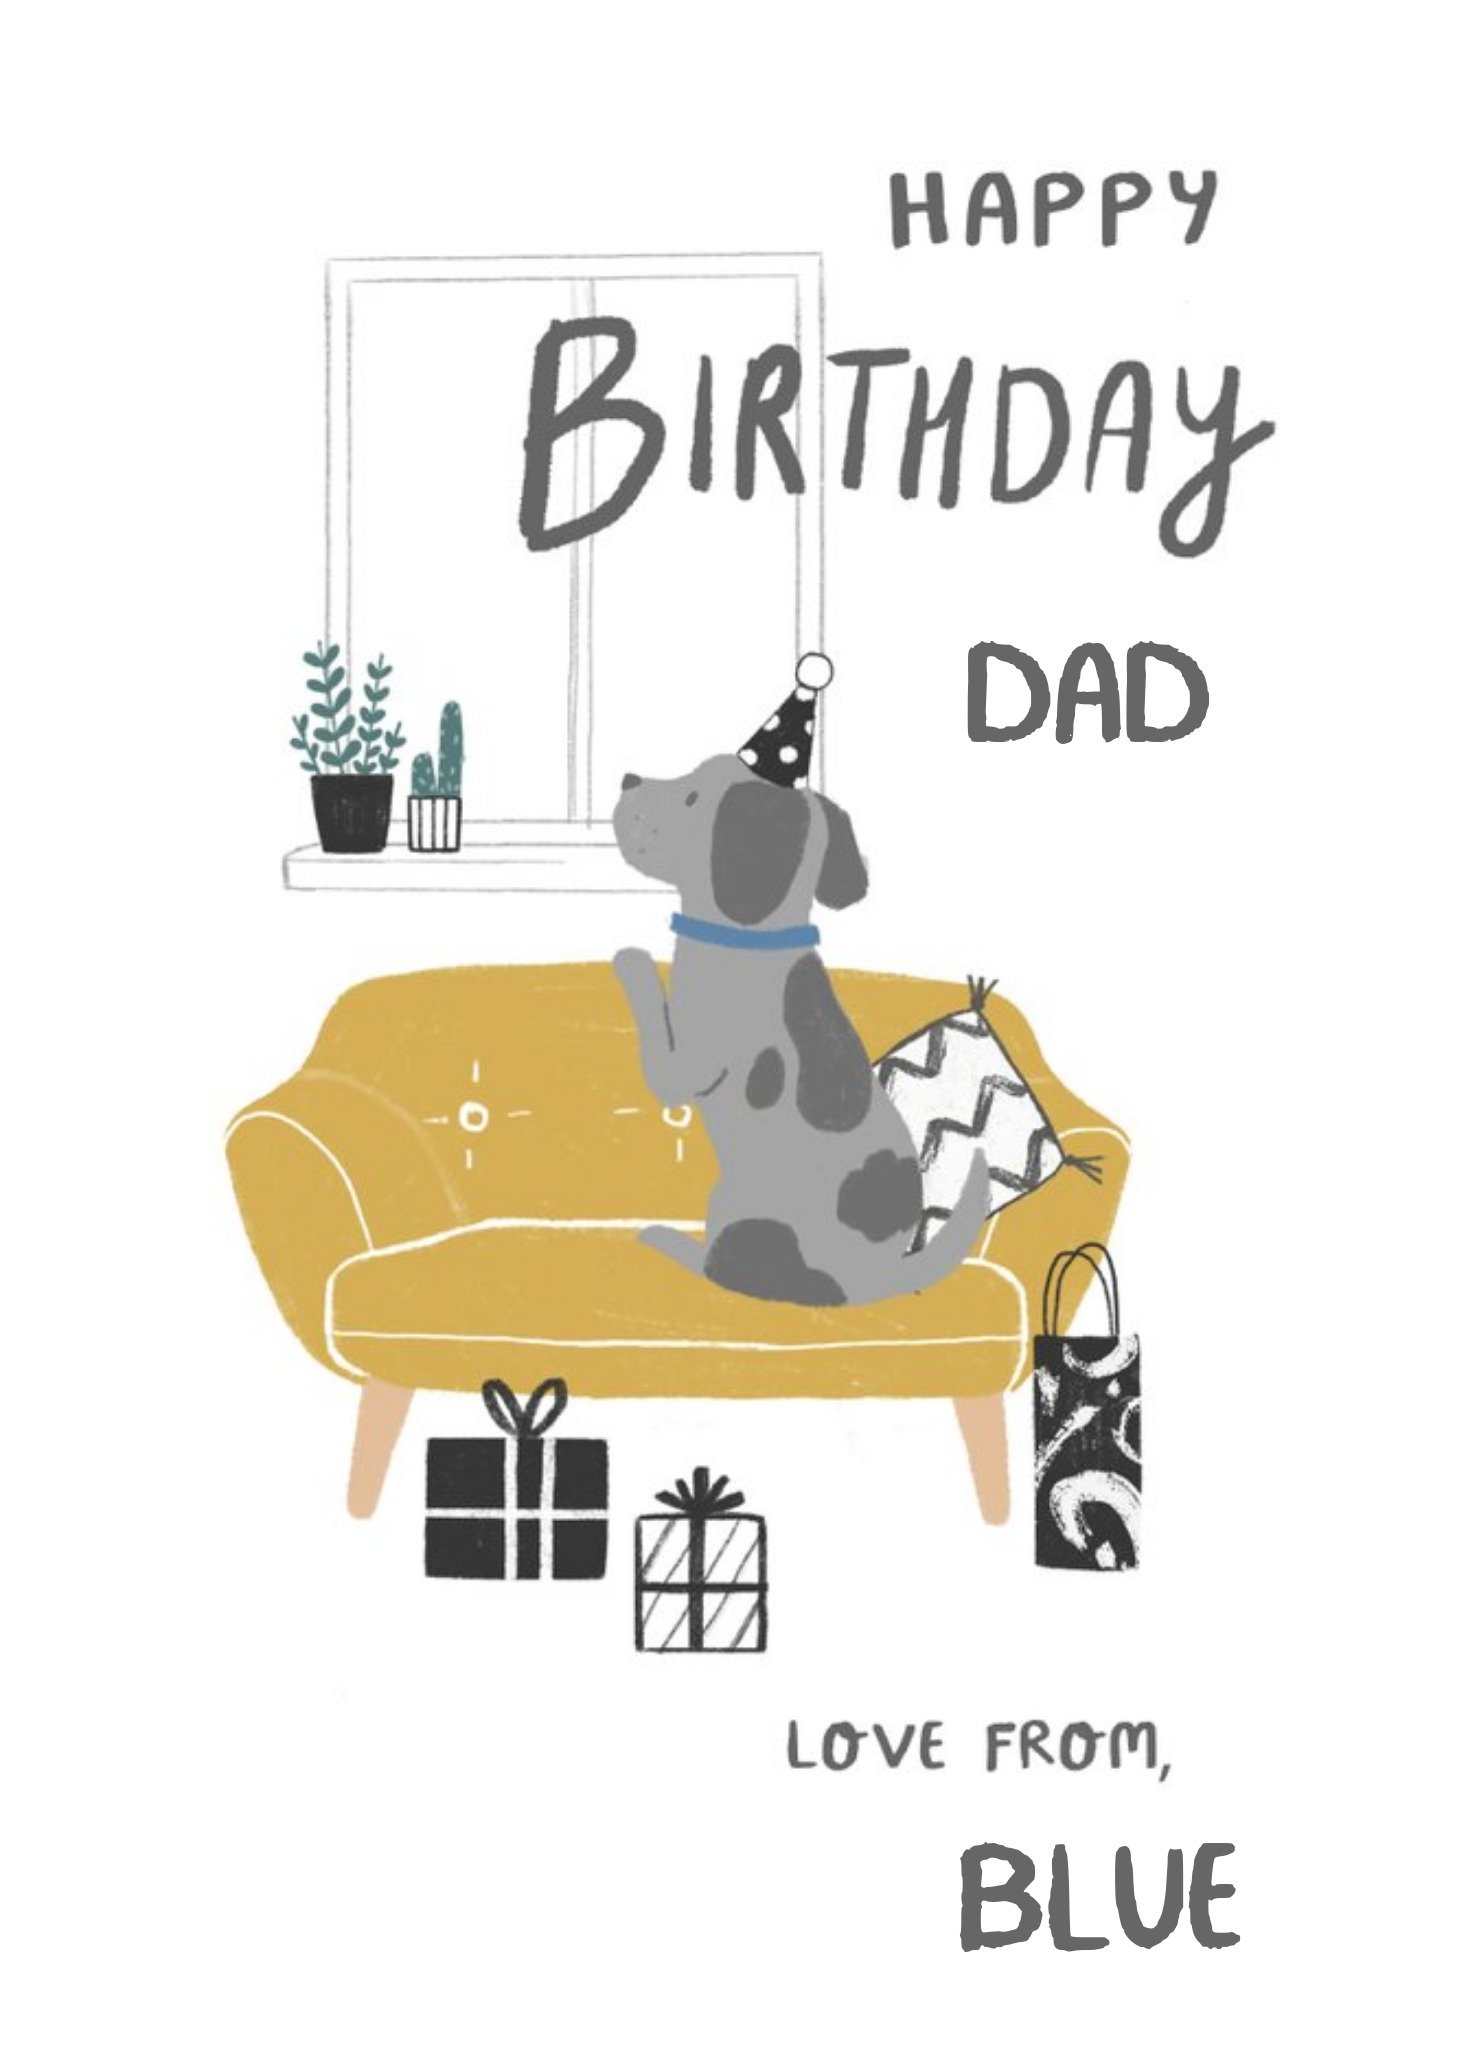 Other Millicent Venton Birthday Dad From Dog Pet Mustard Celebration Presents Male Ecard